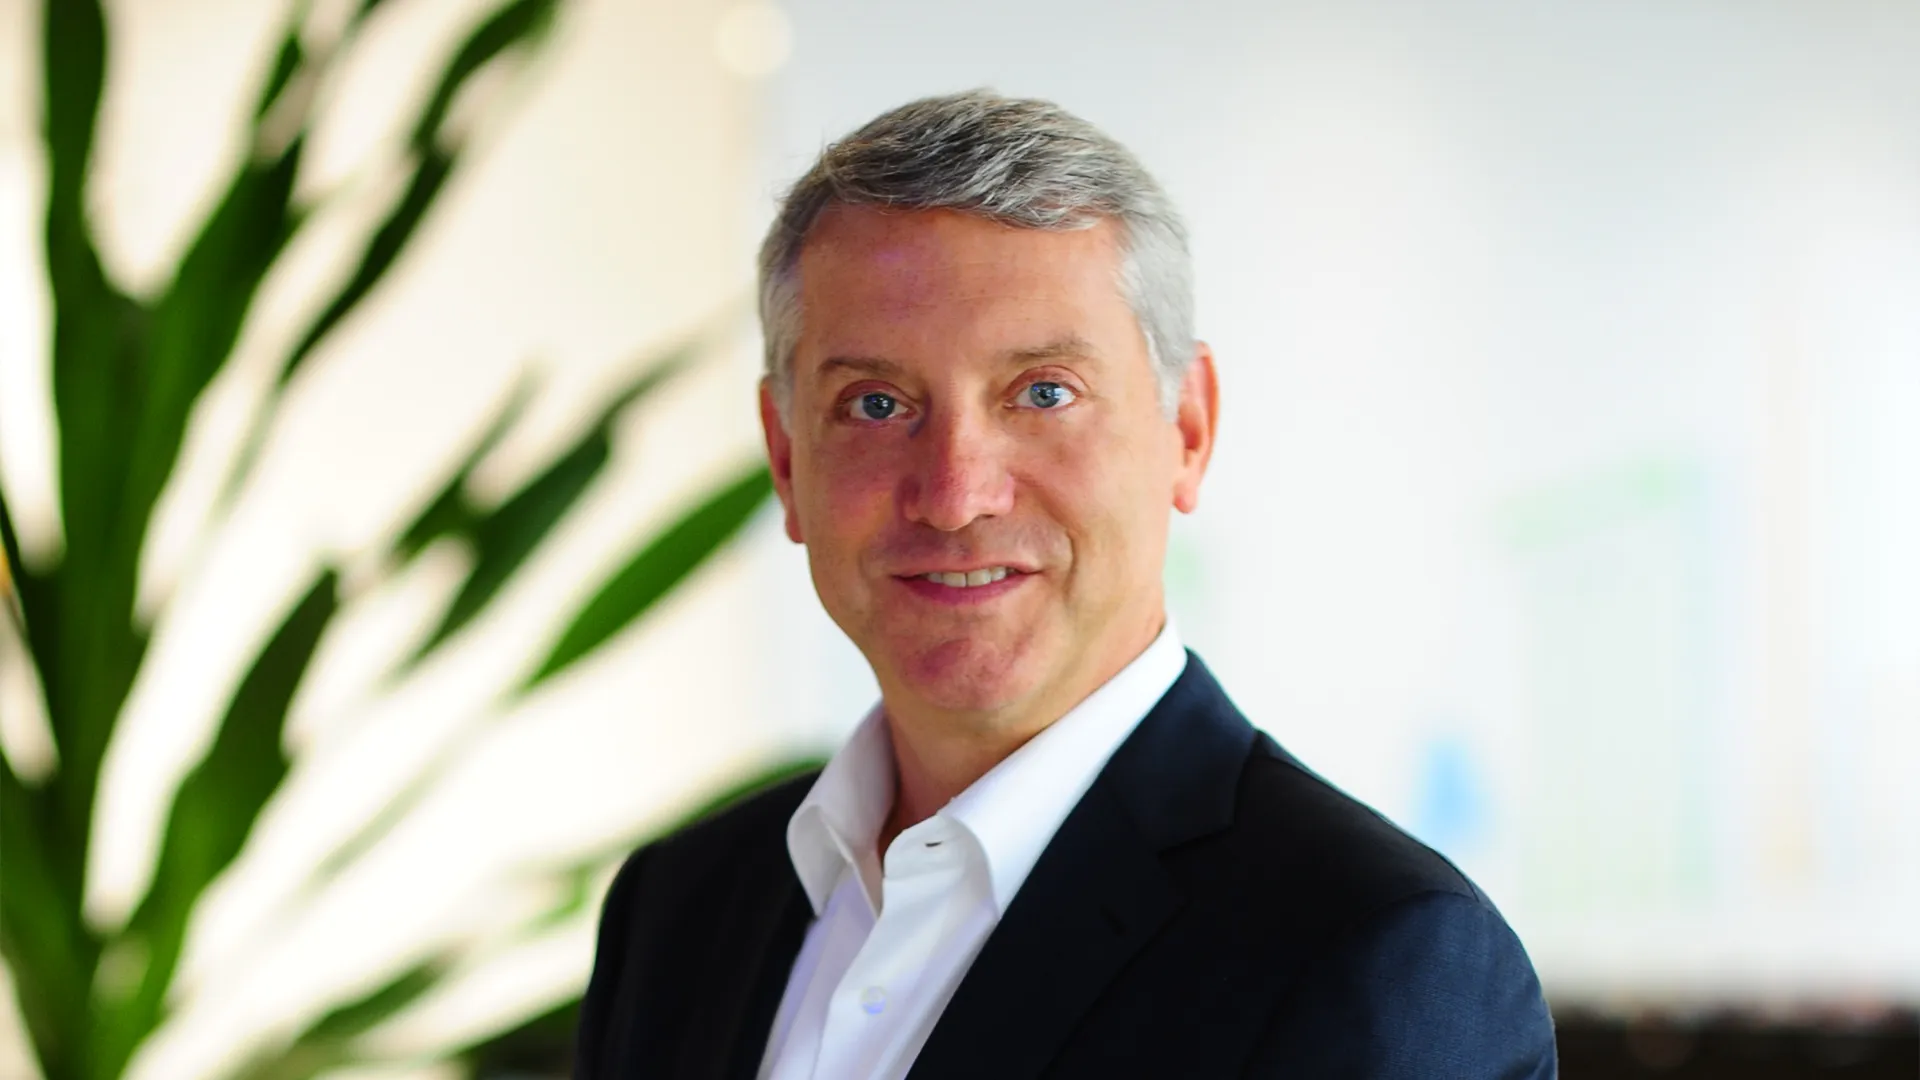 VAST Data Appoints Rick Scurfield to Executive Leadership Team  as Chief Revenue Officer